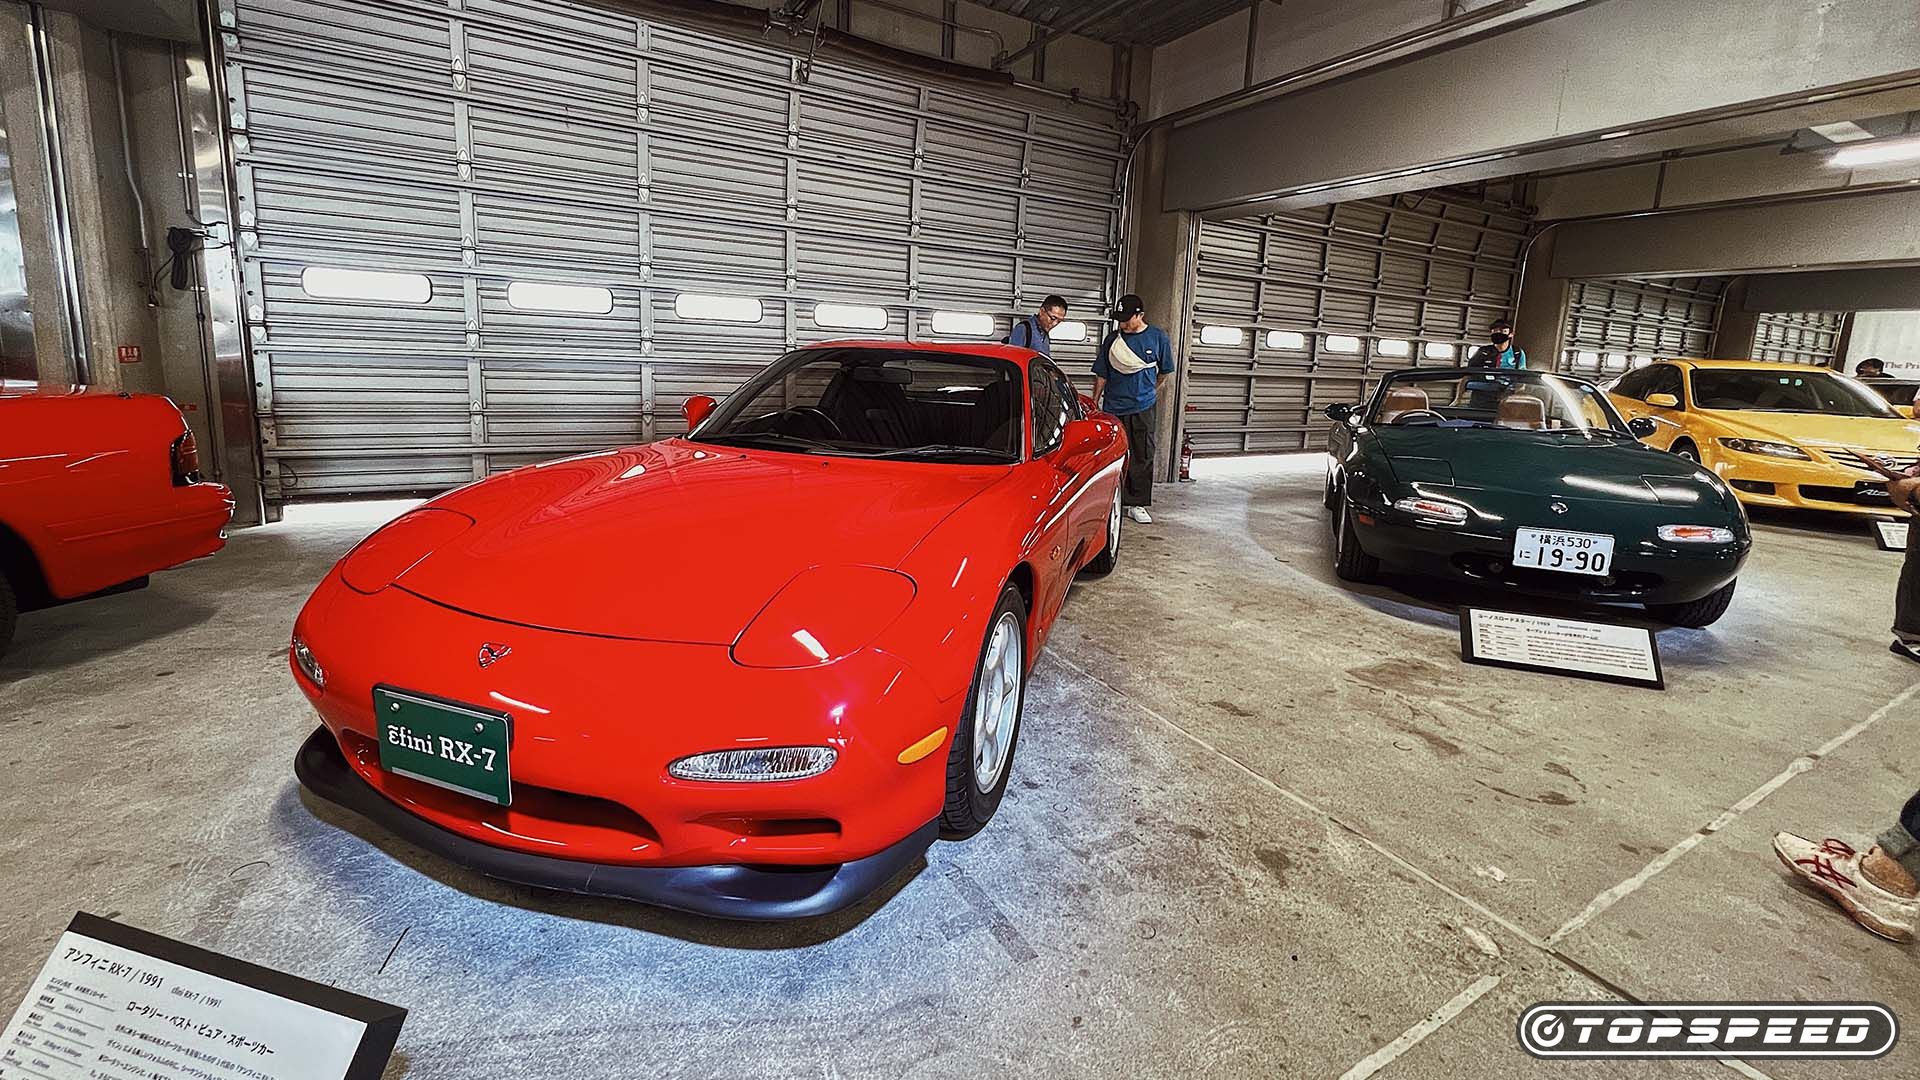 Mazda RX-7 and Eunos Roadster at Fuji Speedway